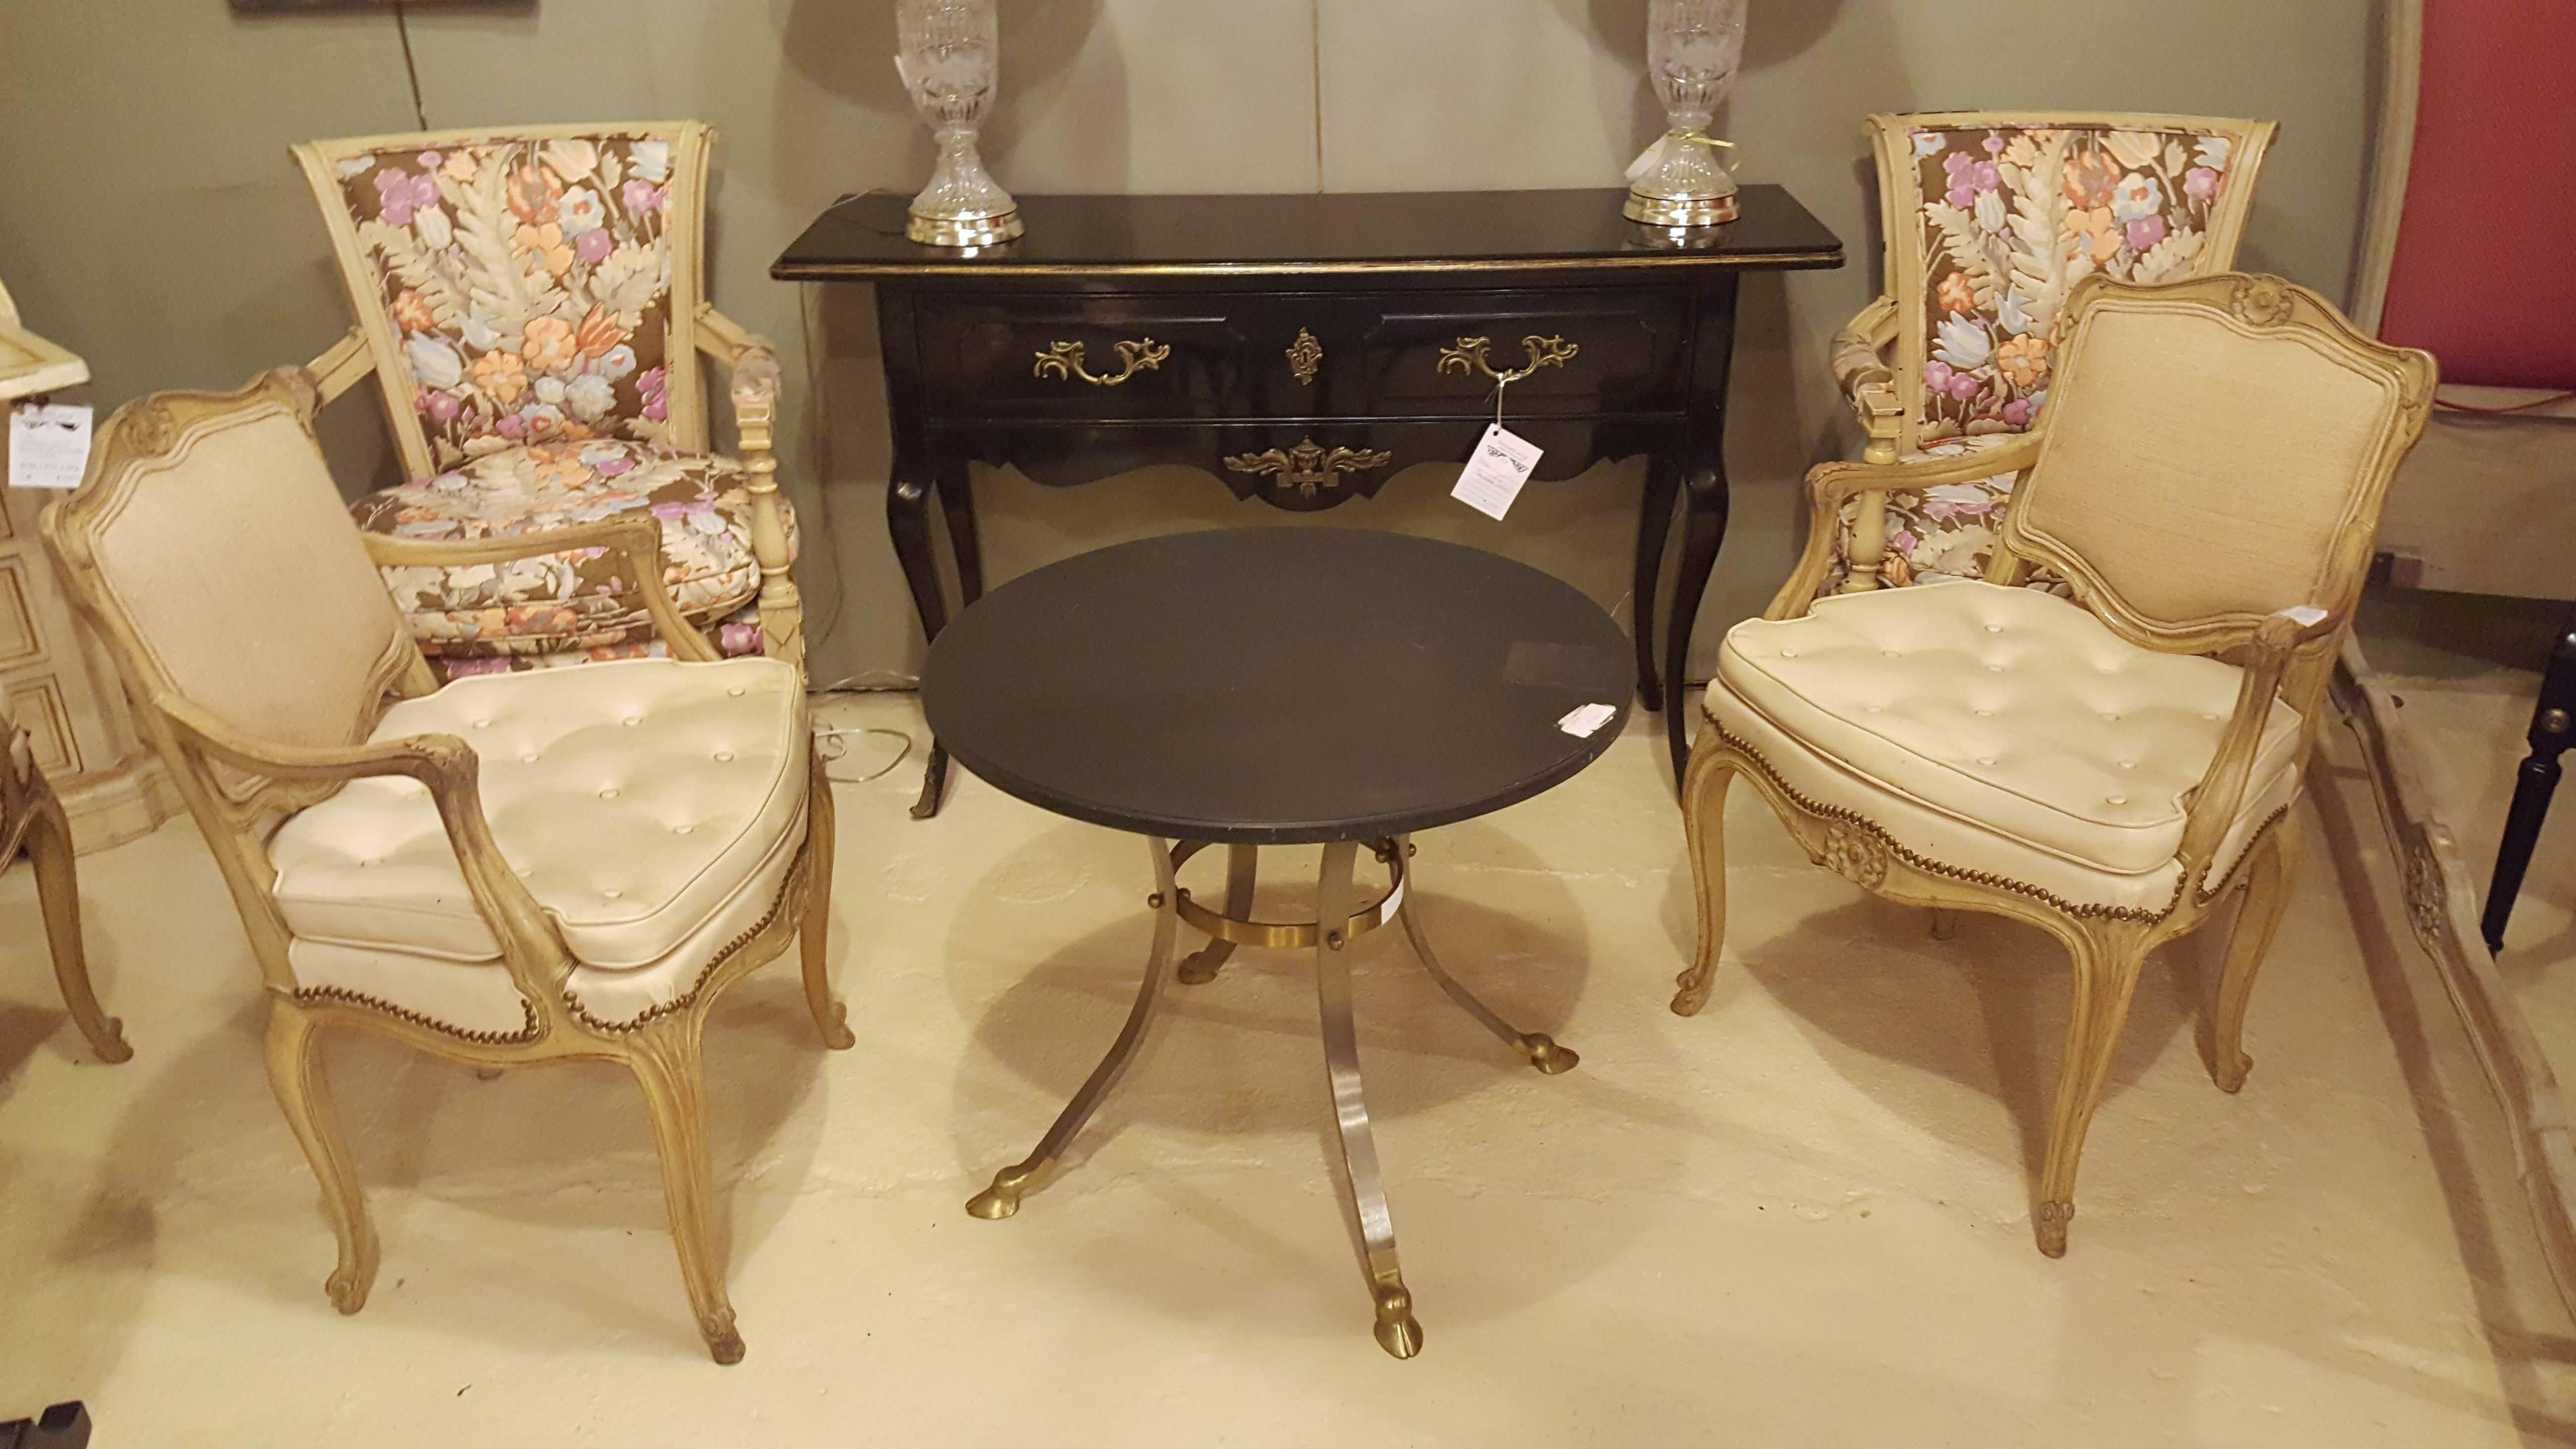 A brass and steel Gueridon table attributed to Maison Jansen. This unique table has an ebony circle marble top, and sits on four hoofs stylized feet.